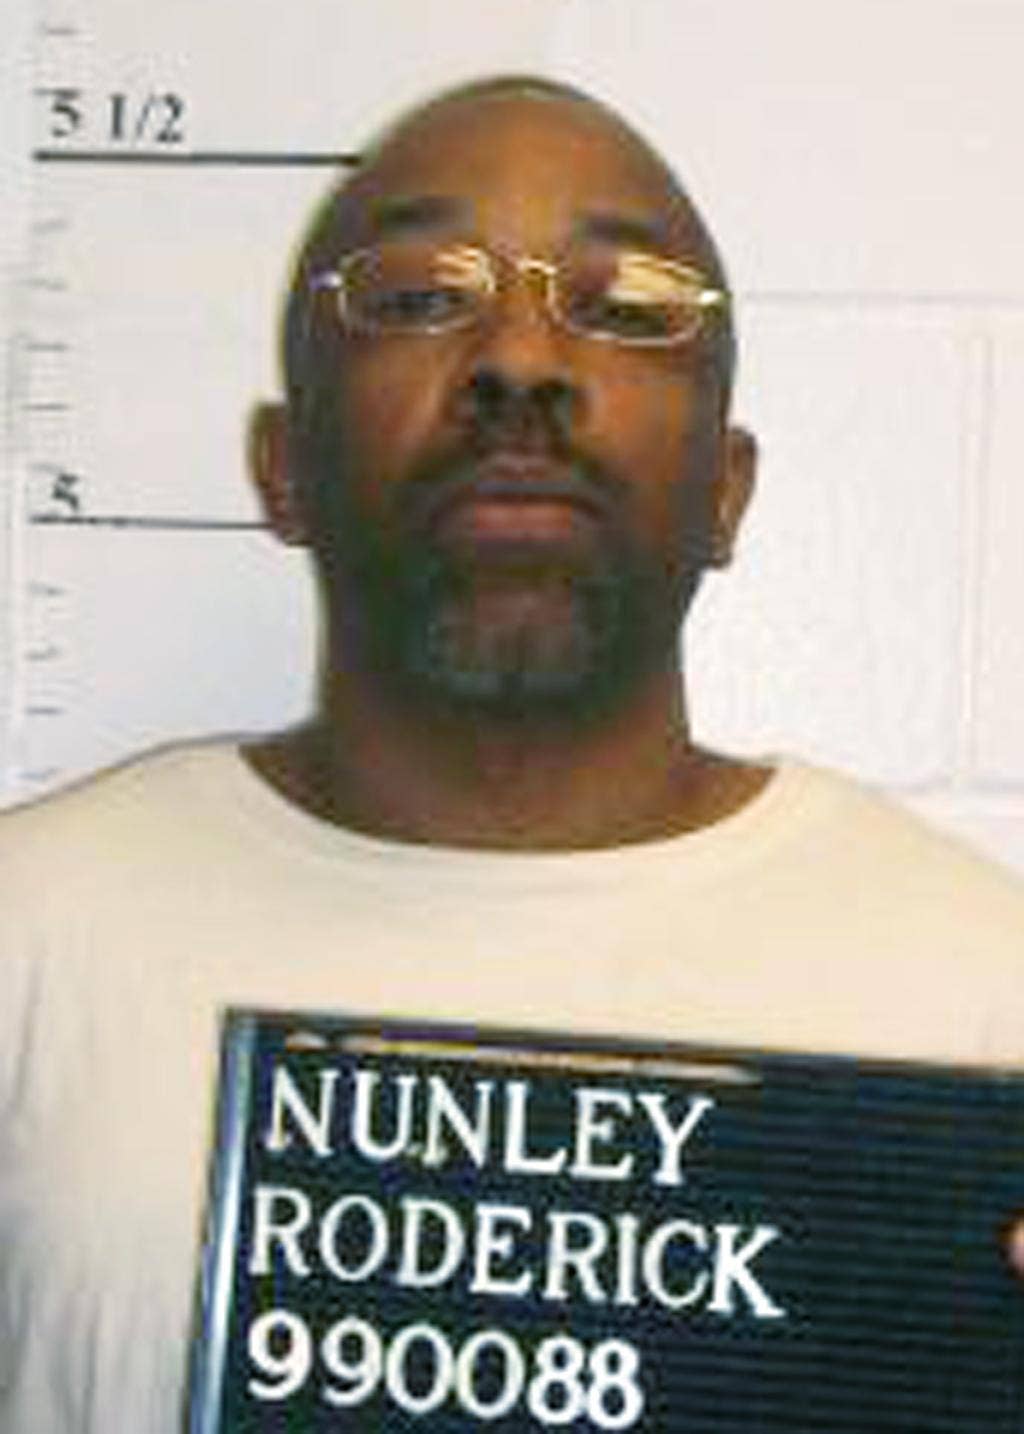 Missouri prison officials prepare to execute man who kidnapped, raped